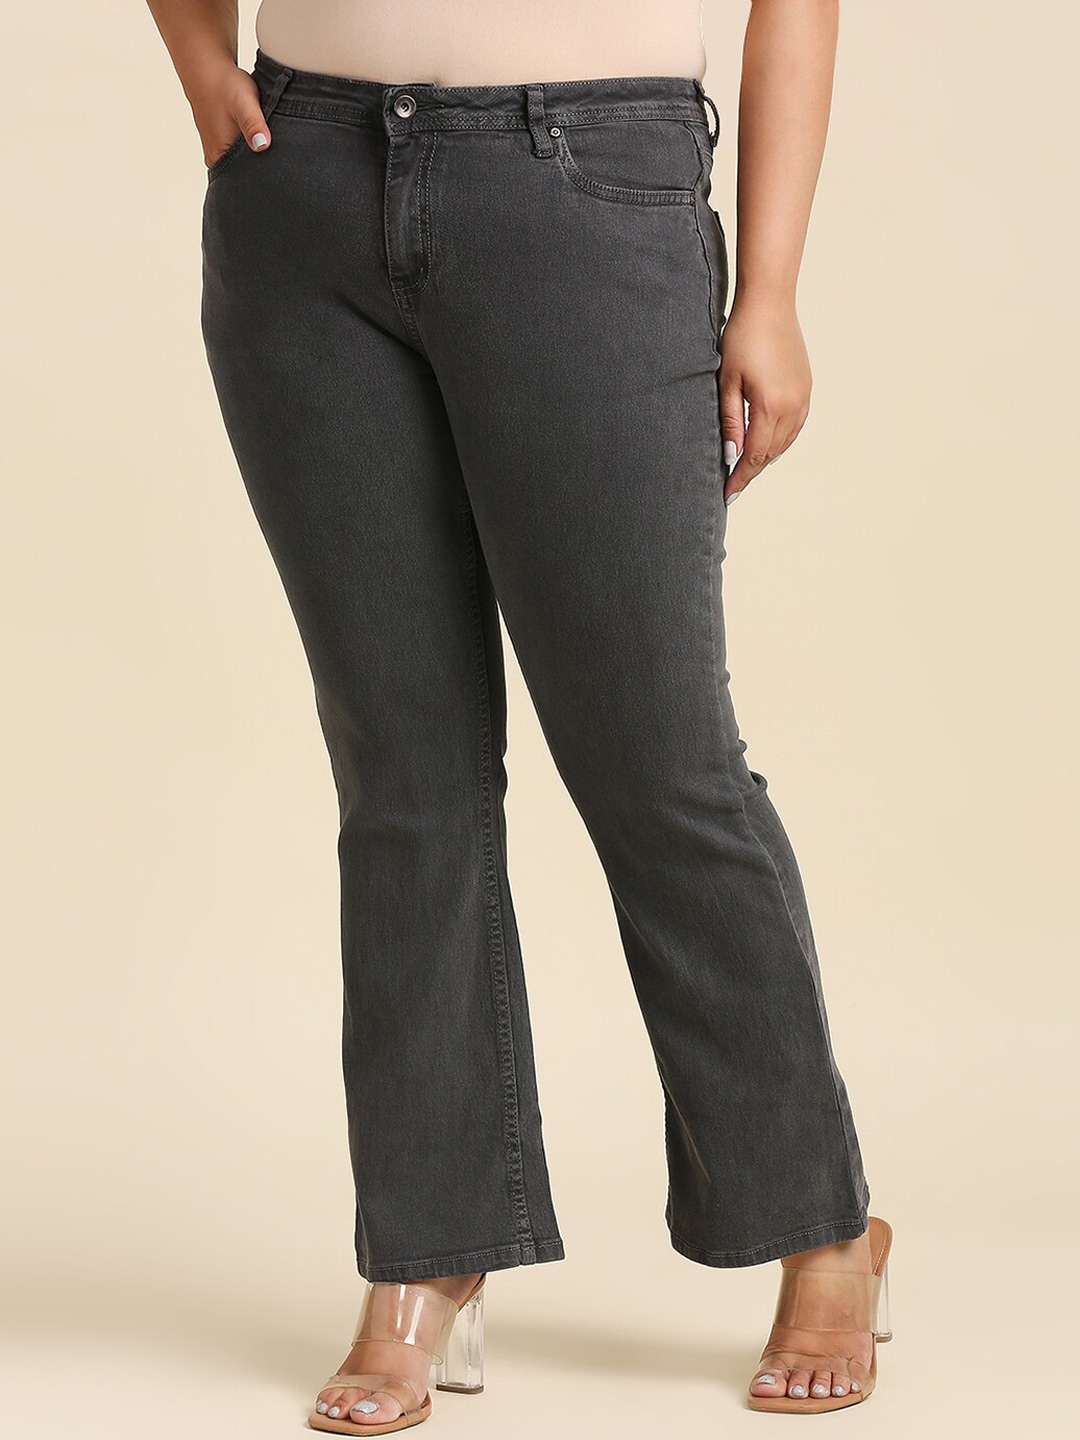 High Star Women Plus Size Grey Bootcut Stretchable Jeans Price in India